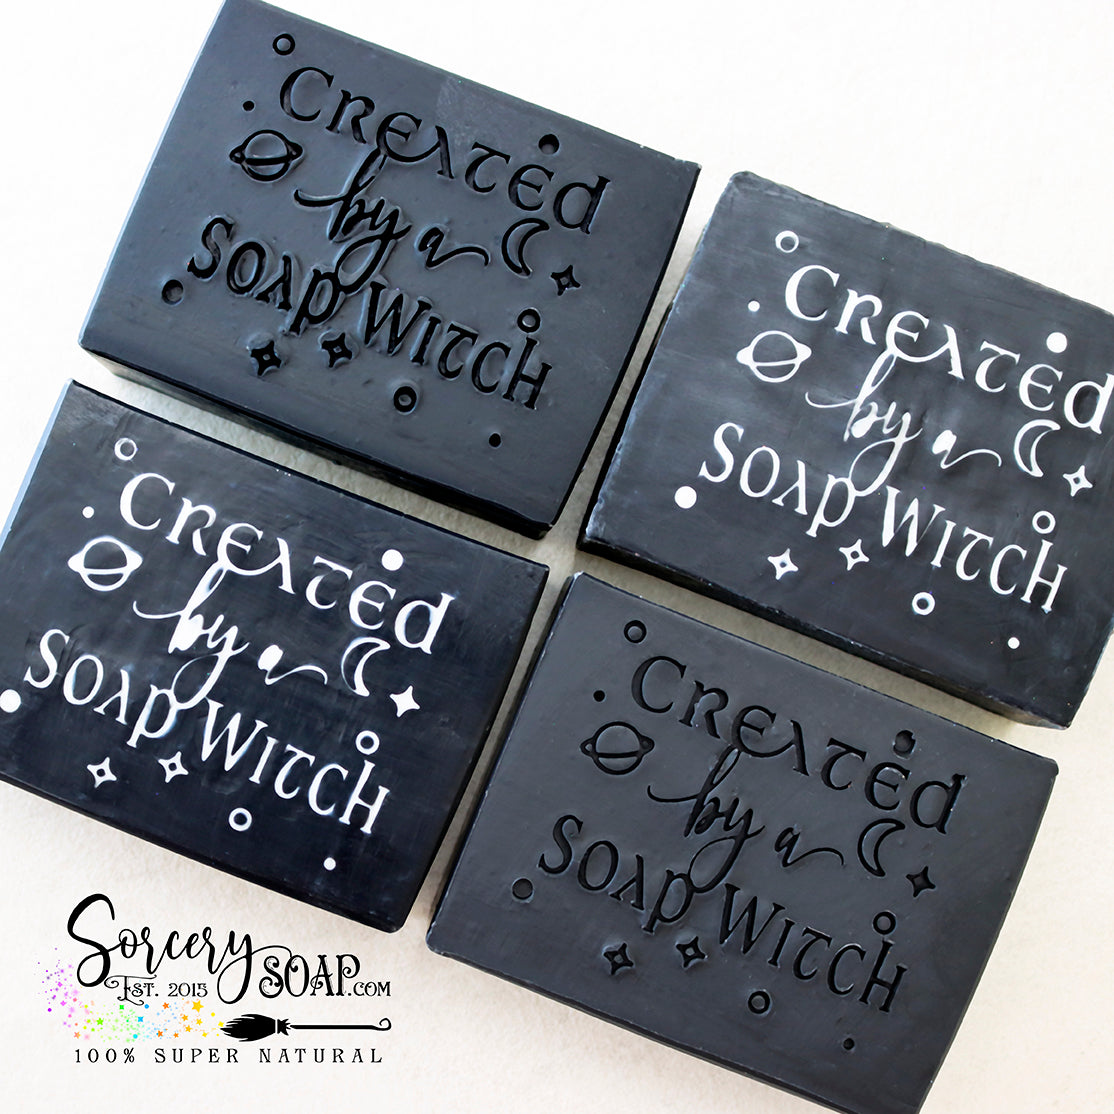 Created by A Soap Witch Stamp